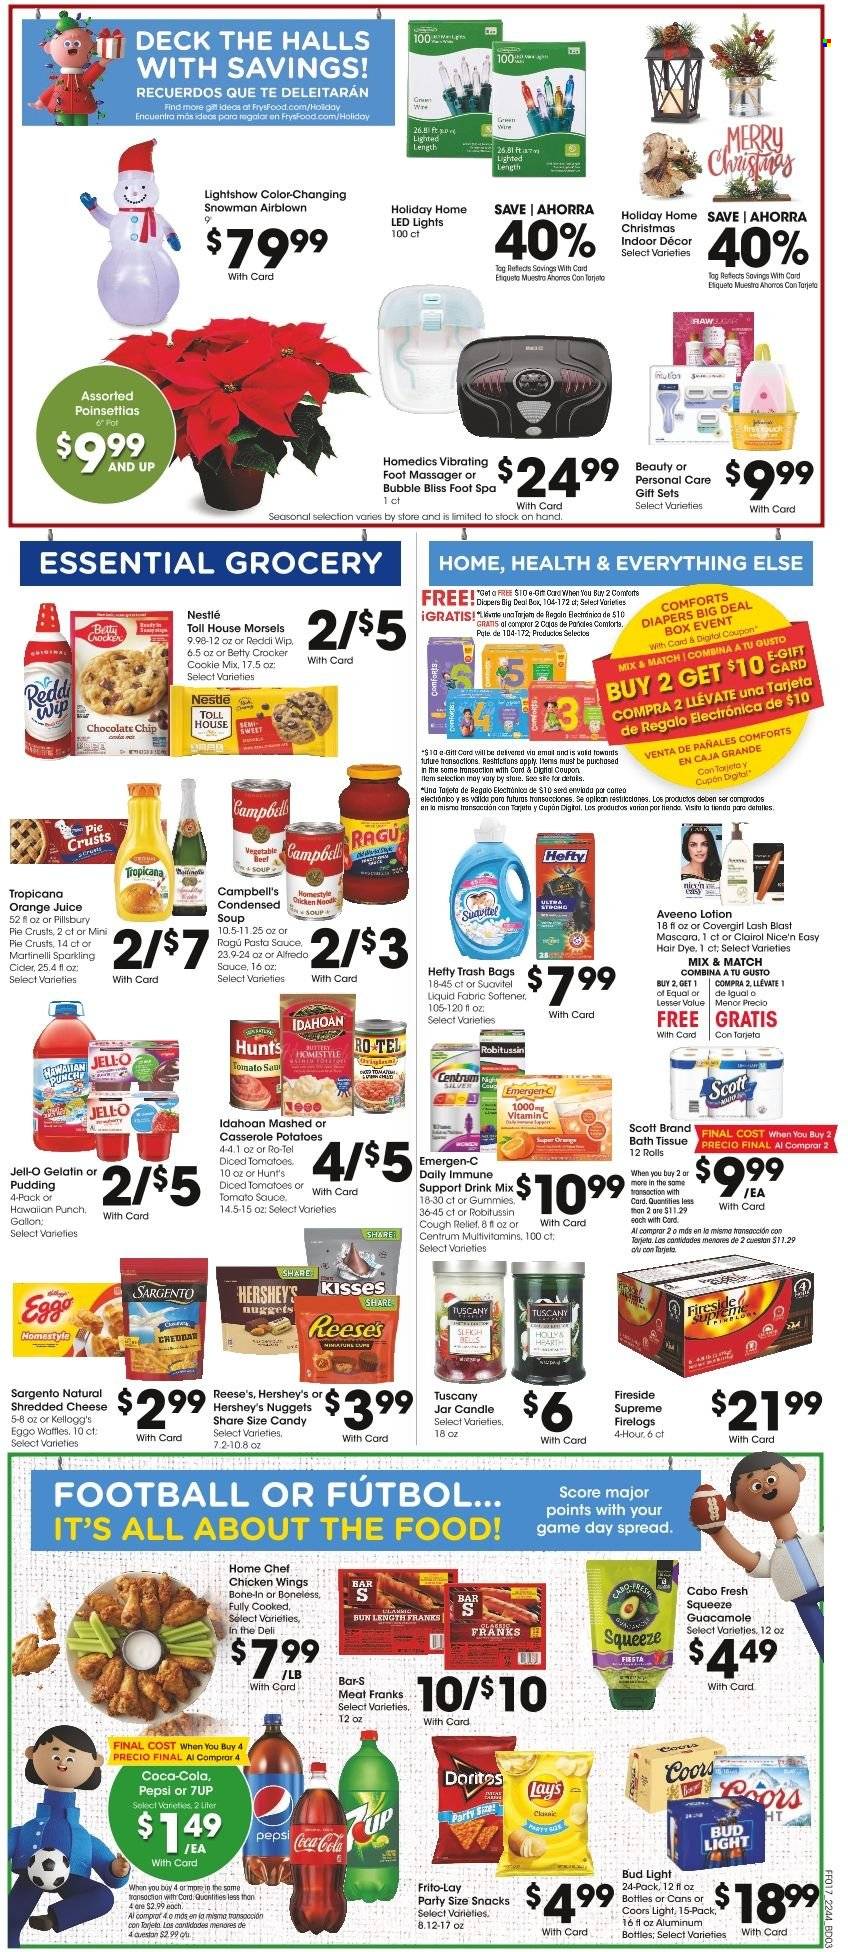 thumbnail - Fry’s Flyer - 11/30/2022 - 12/06/2022 - Sales products - pie, waffles, tomatoes, Campbell's, pasta sauce, condensed soup, soup, nuggets, Pillsbury, instant soup, ragú pasta, guacamole, shredded cheese, cheddar, Sargento, pudding, Reese's, Hershey's, chicken wings, Nestlé, Halls, chocolate chips, snack, Kellogg's, Doritos, Lay’s, Frito-Lay, pie crust, Jell-O, tomato sauce, diced tomatoes, ragu, Coca-Cola, Pepsi, orange juice, juice, 7UP, sparkling cider, sparkling wine, cider, beer, Bud Light, nappies, Aveeno, bath tissue, Scott, fabric softener, Clairol, body lotion, Hefty, trash bags, mascara, pot, casserole, cup, candle, massager, foot massager, foot spa, LED light, multivitamin, Robitussin, vitamin c, Emergen-C, Centrum, Coors. Page 6.